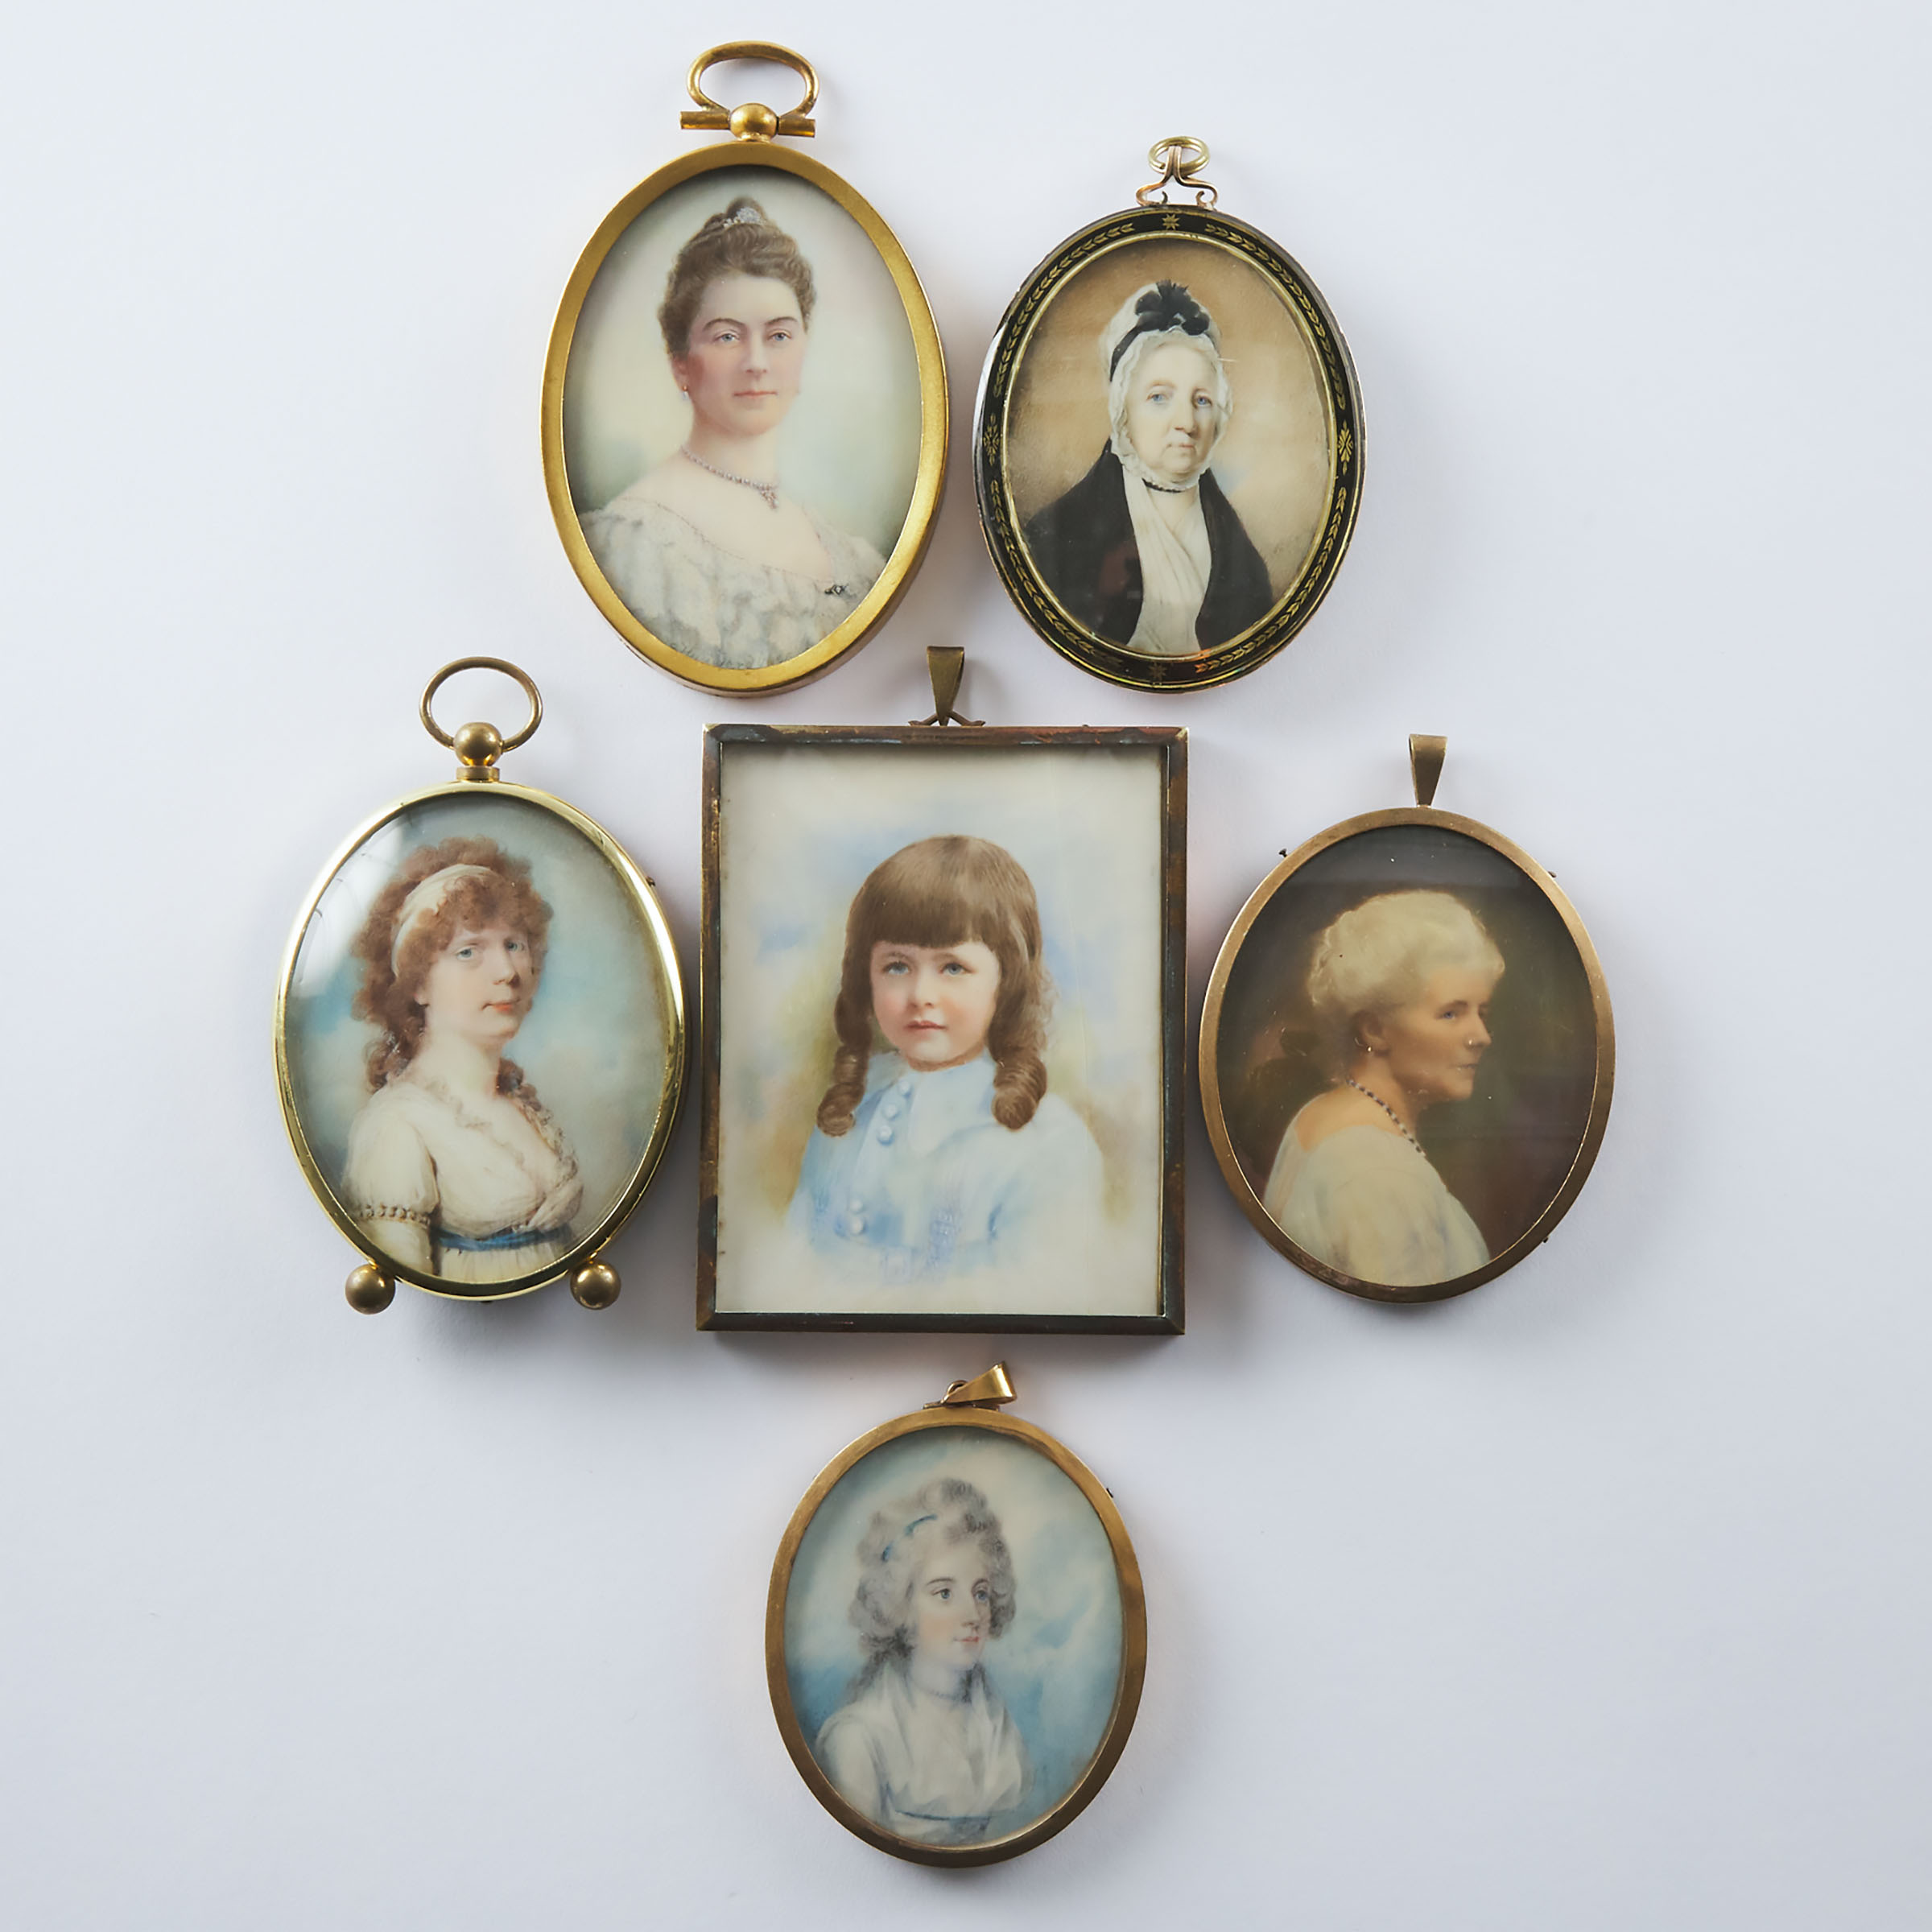 Five Portrait Miniatures of Ladies and One of a Young Girl, 18th, 19th and early 20th centuries